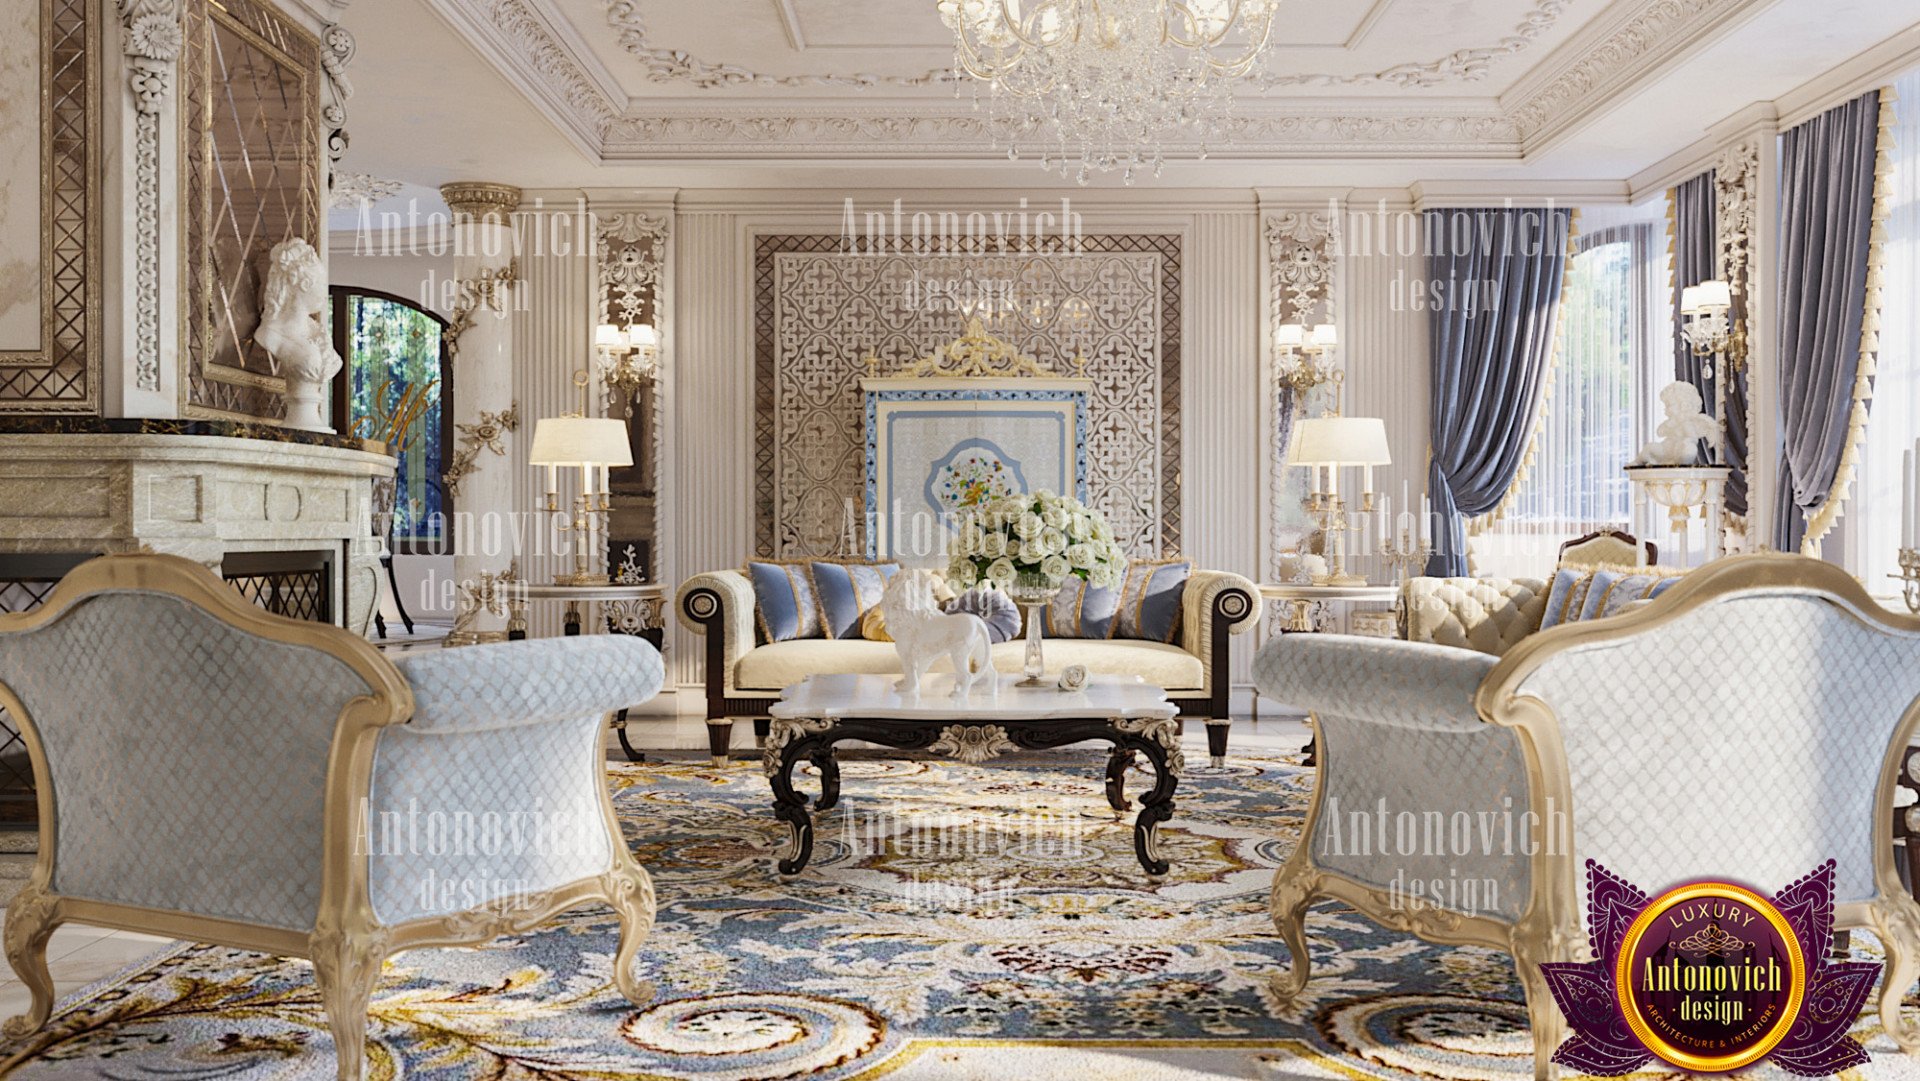 Elegant Home Interior Design: Timeless Beauty And Refined Sophistication